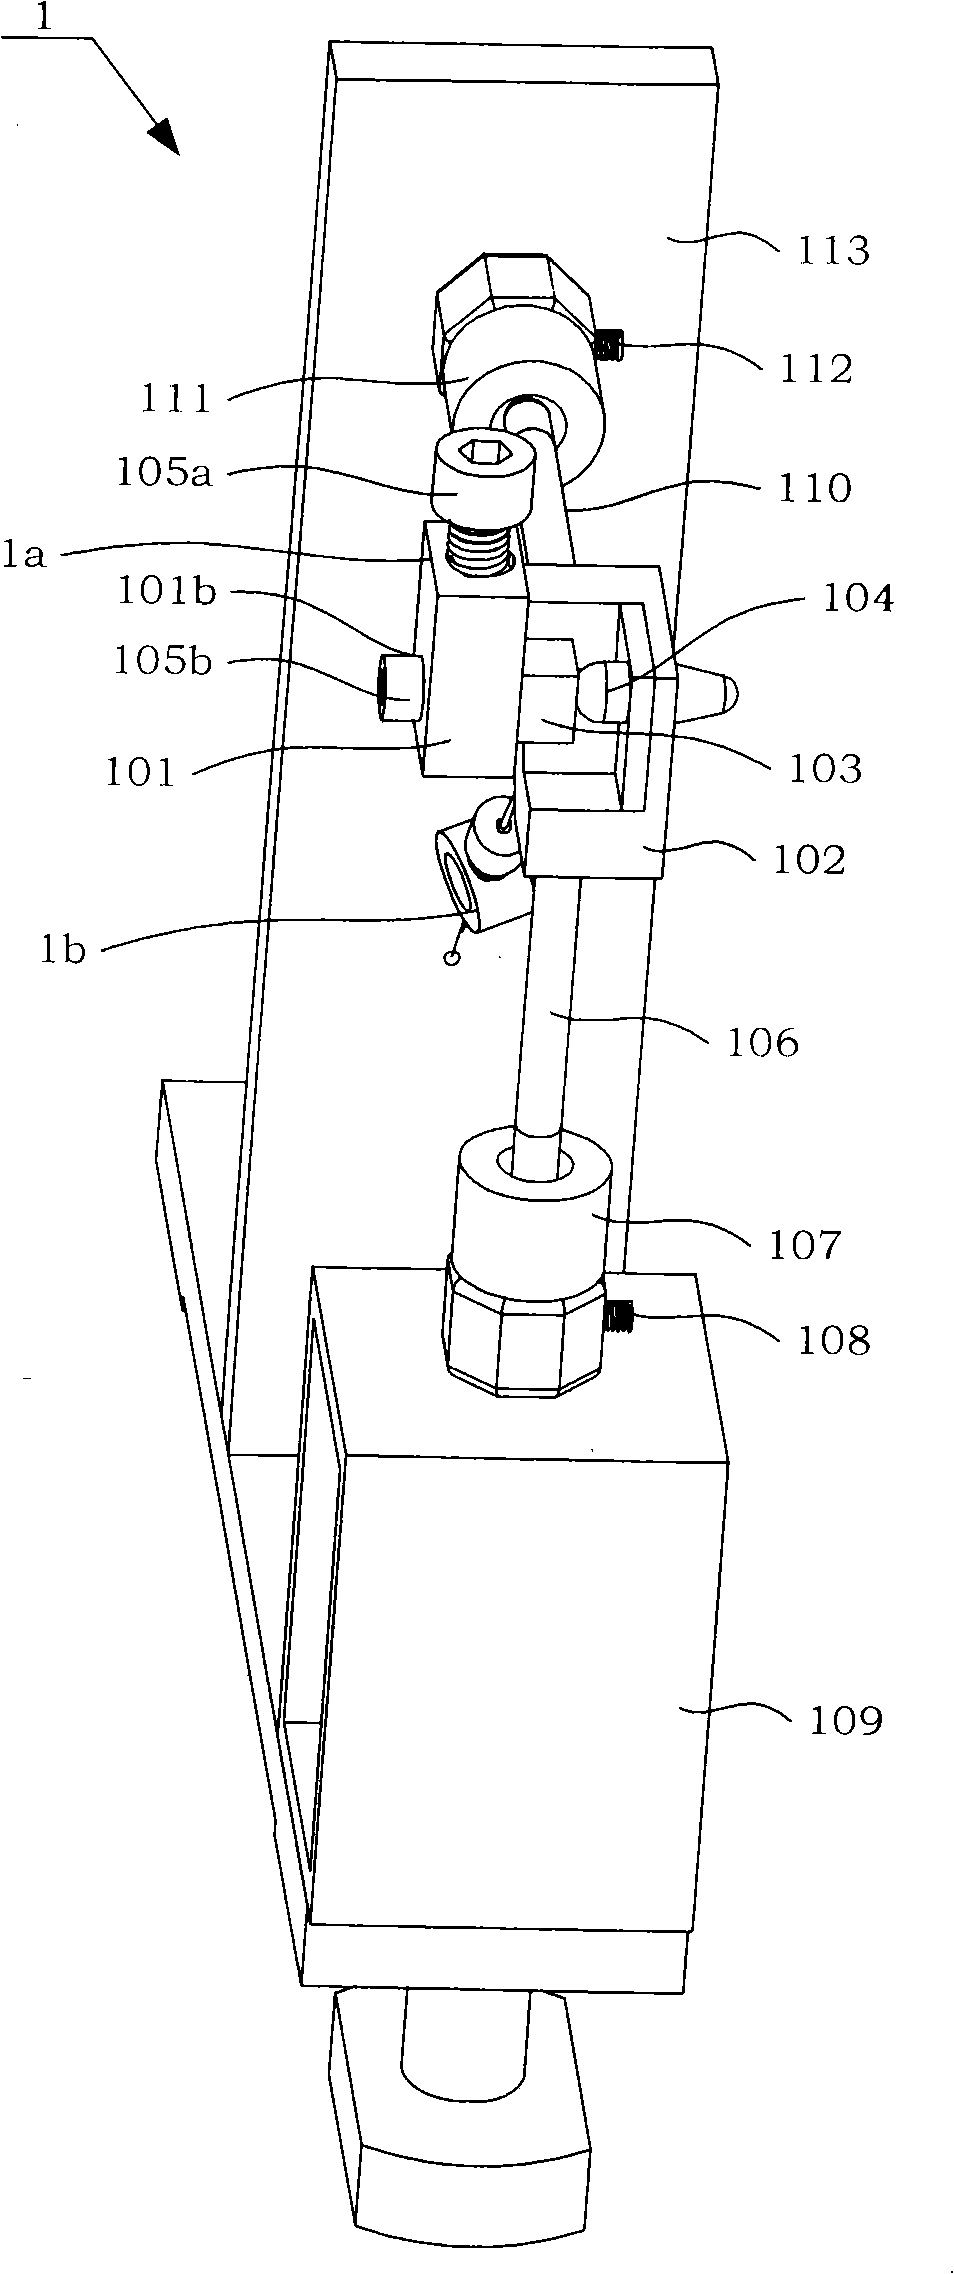 Contact stiffness testing device